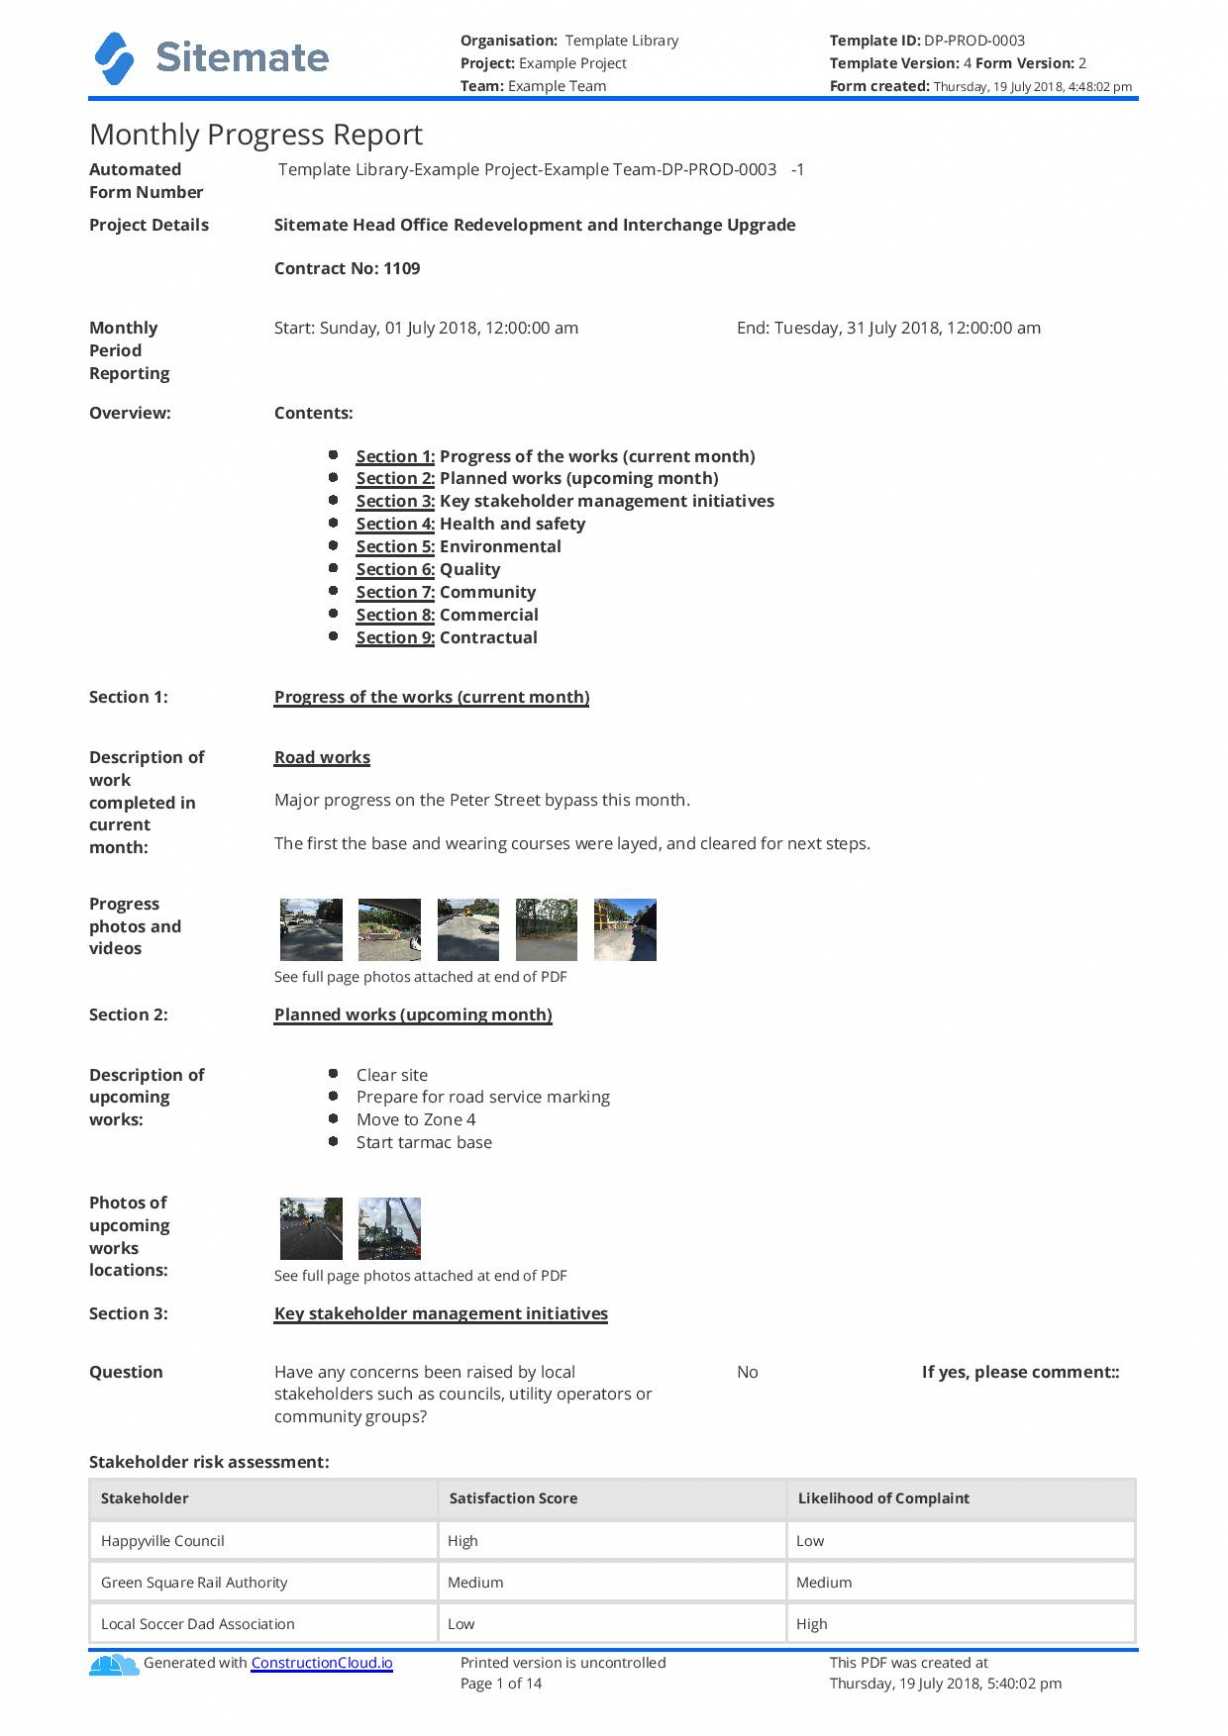 Monthly Construction Progress Report Template: Use This for Engineering Progress Report Template